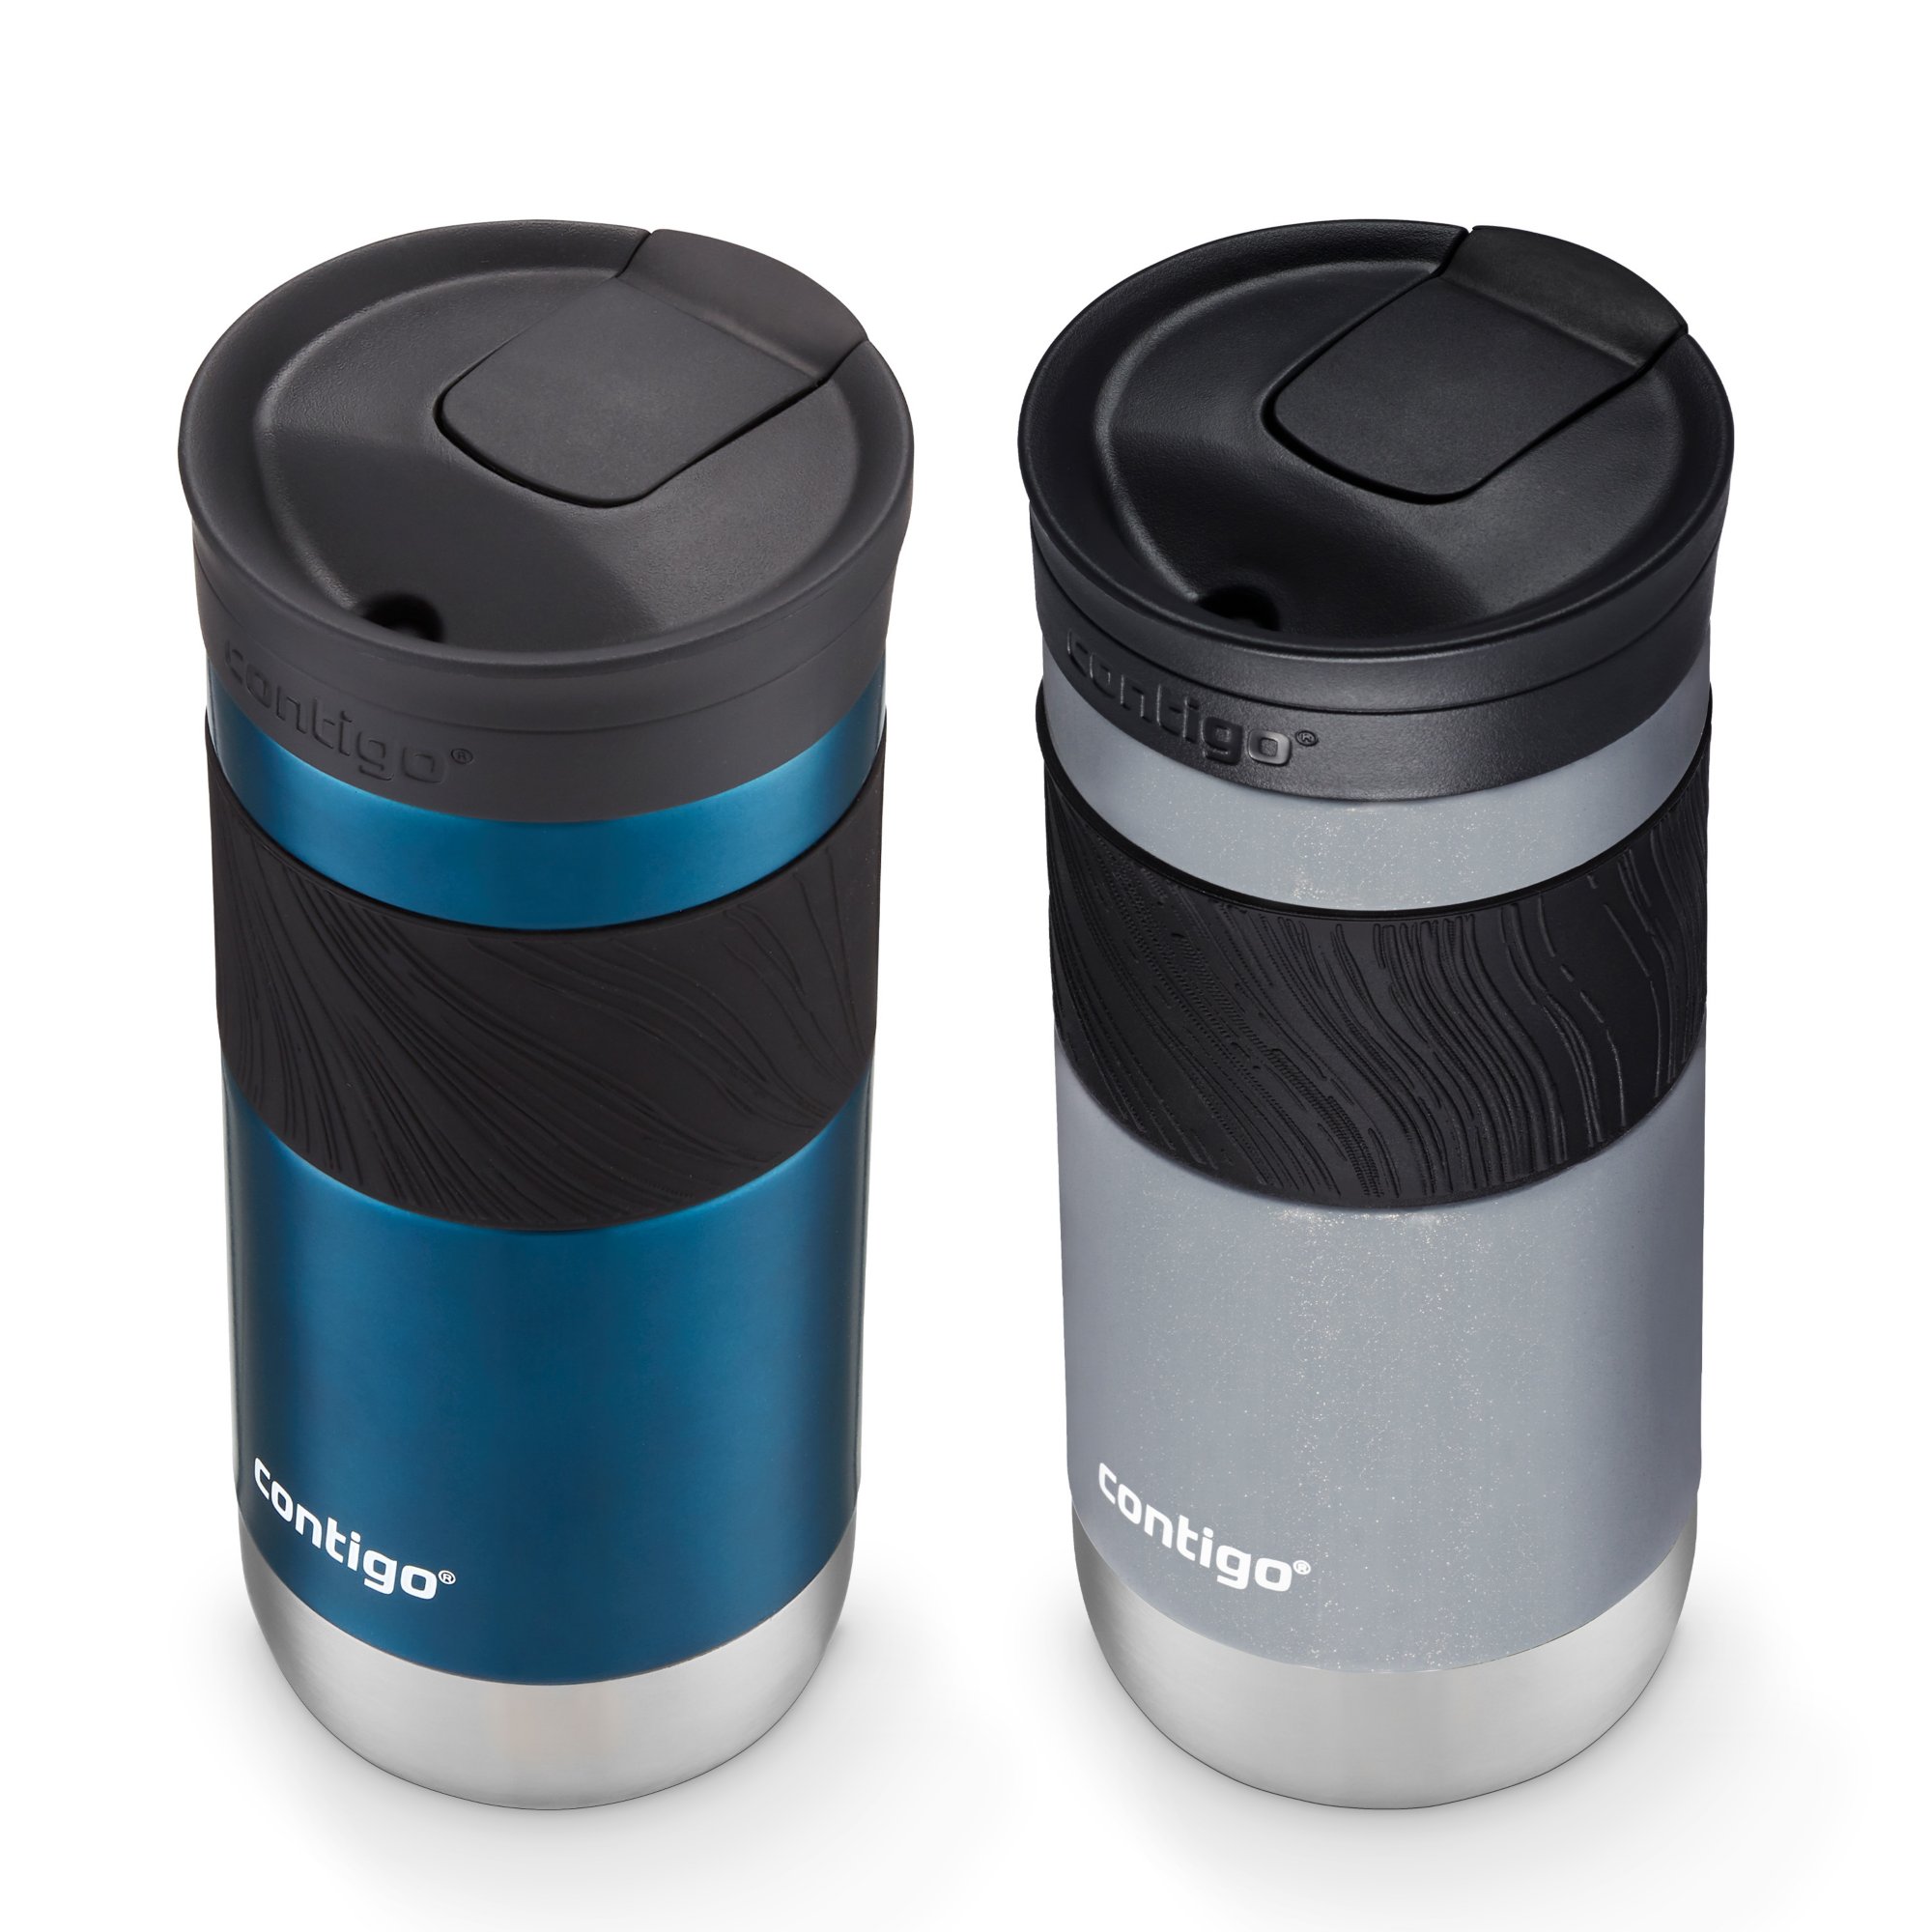 SNAPSEAL™ Insulated Stainless Steel Travel Mug with Grip, 16 oz